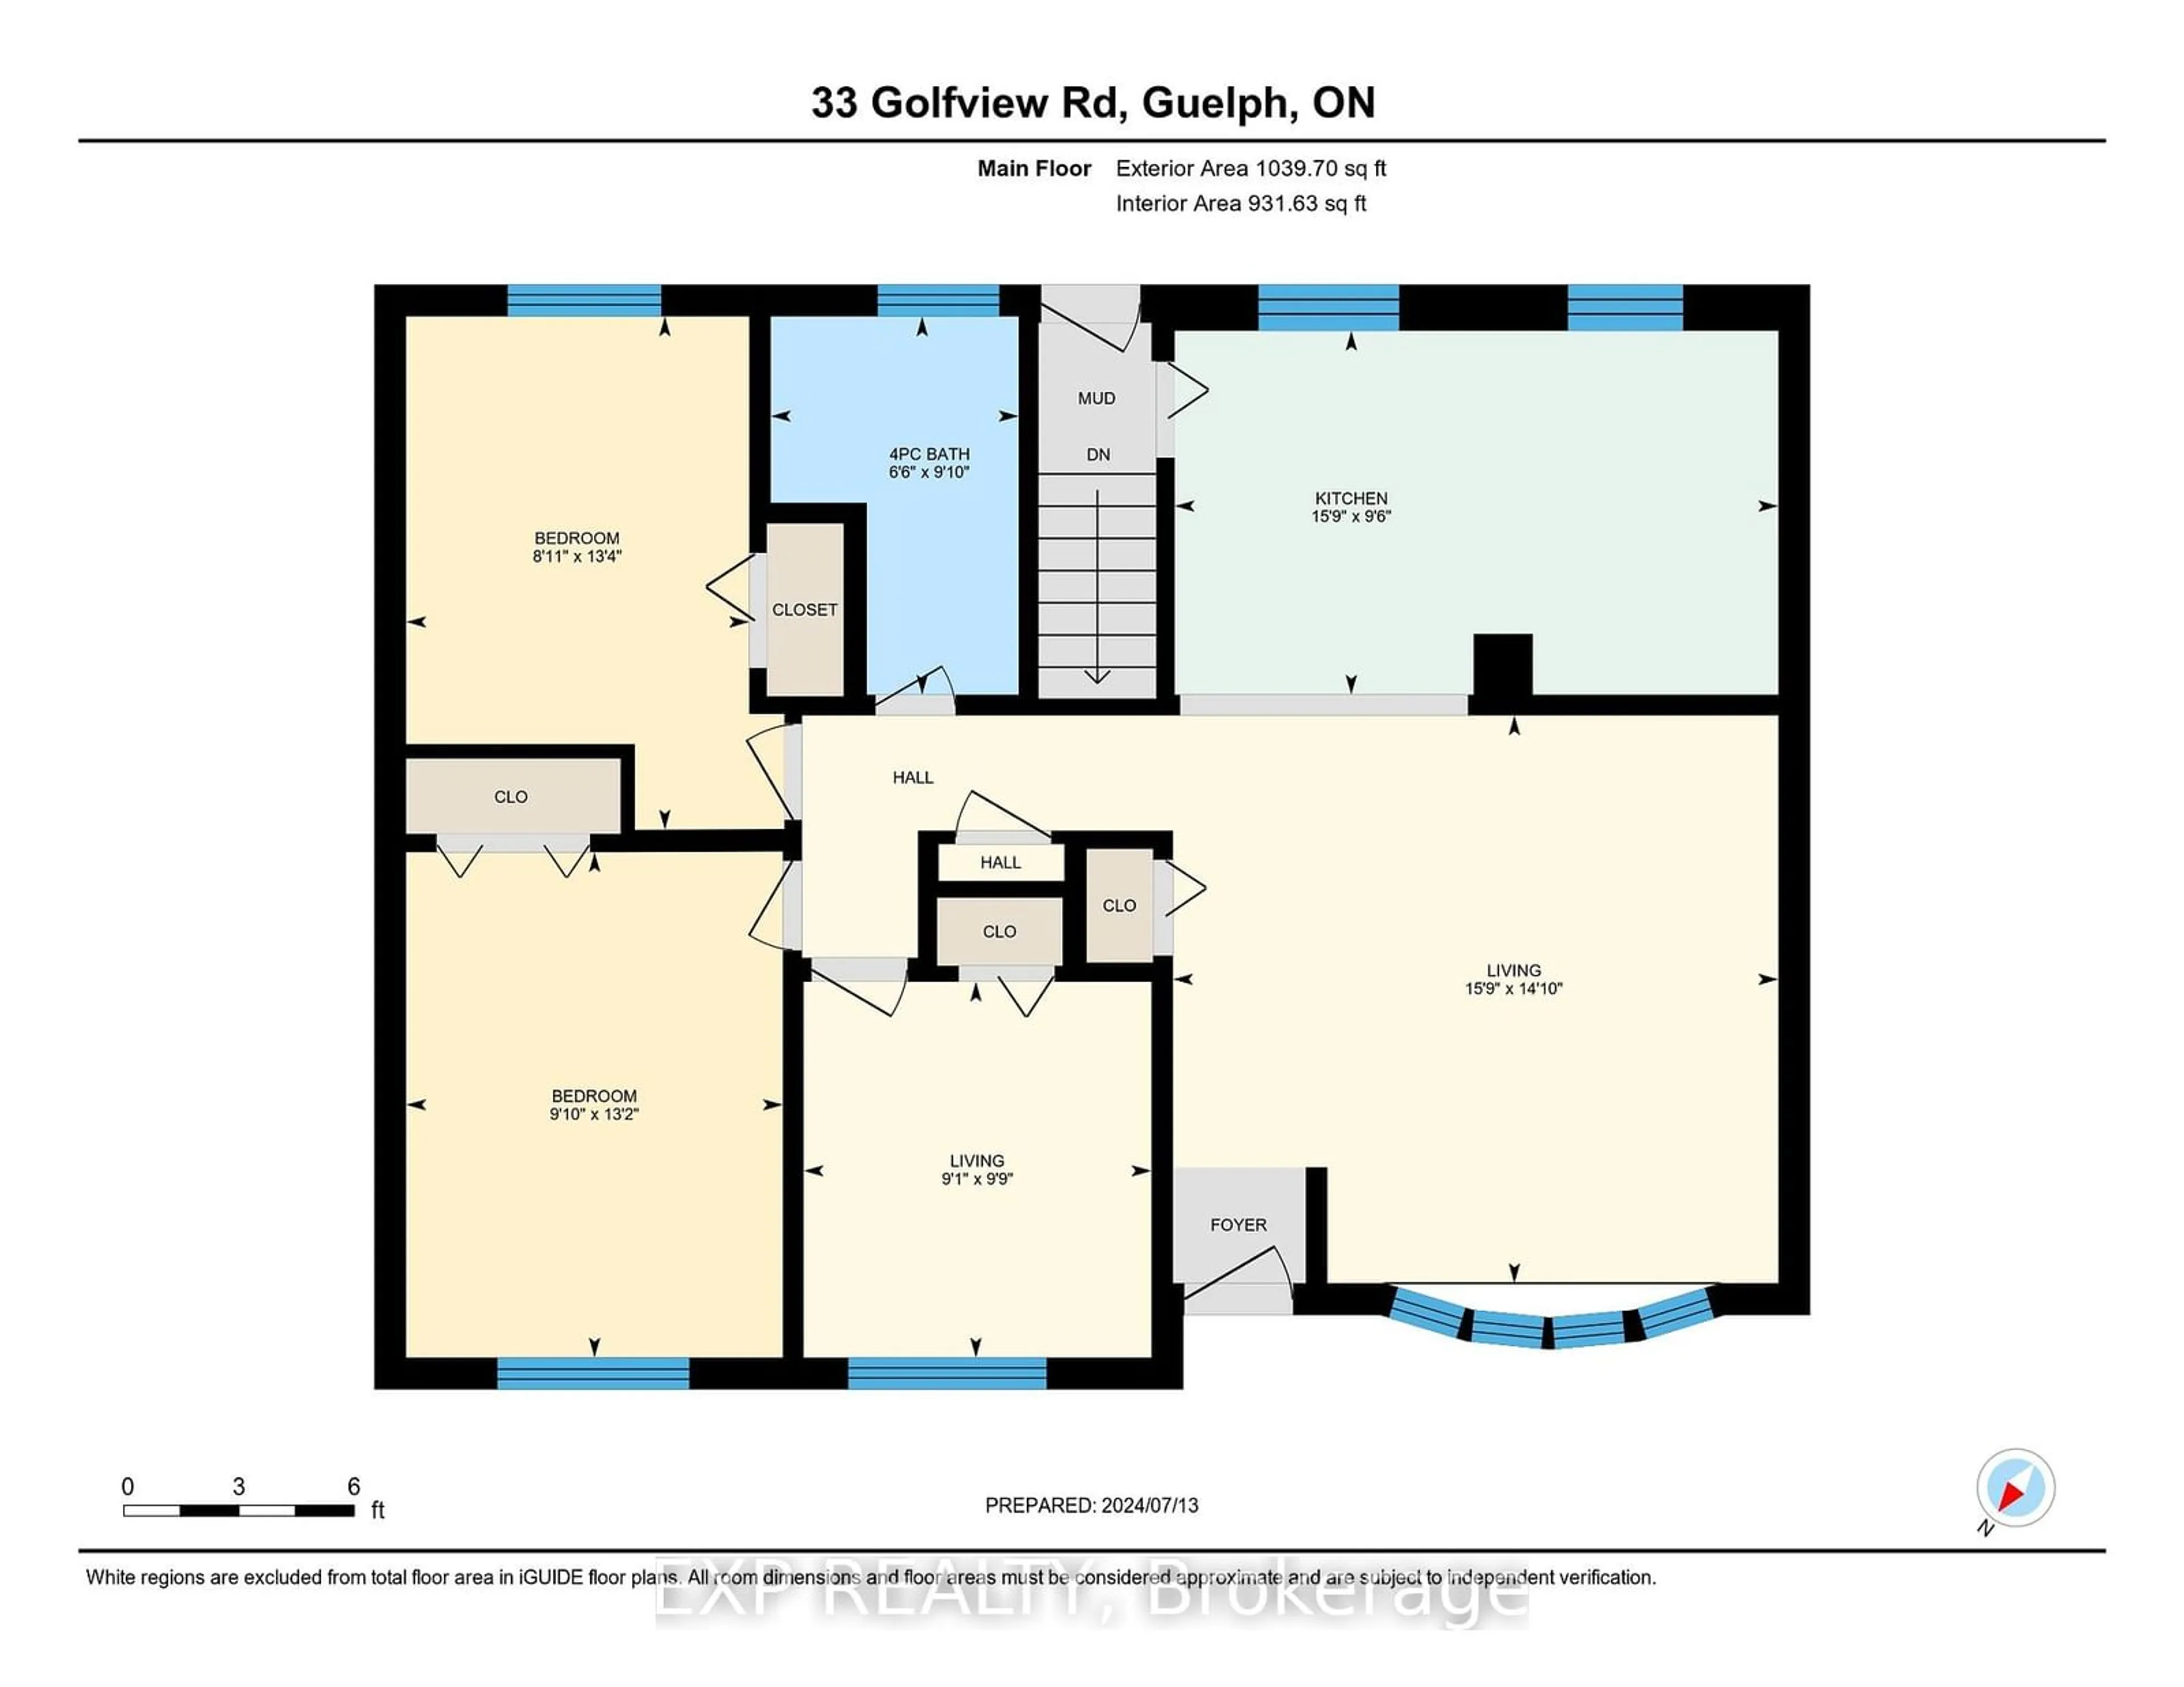 Floor plan for 33 Golfview Rd, Guelph Ontario N1E 1A5